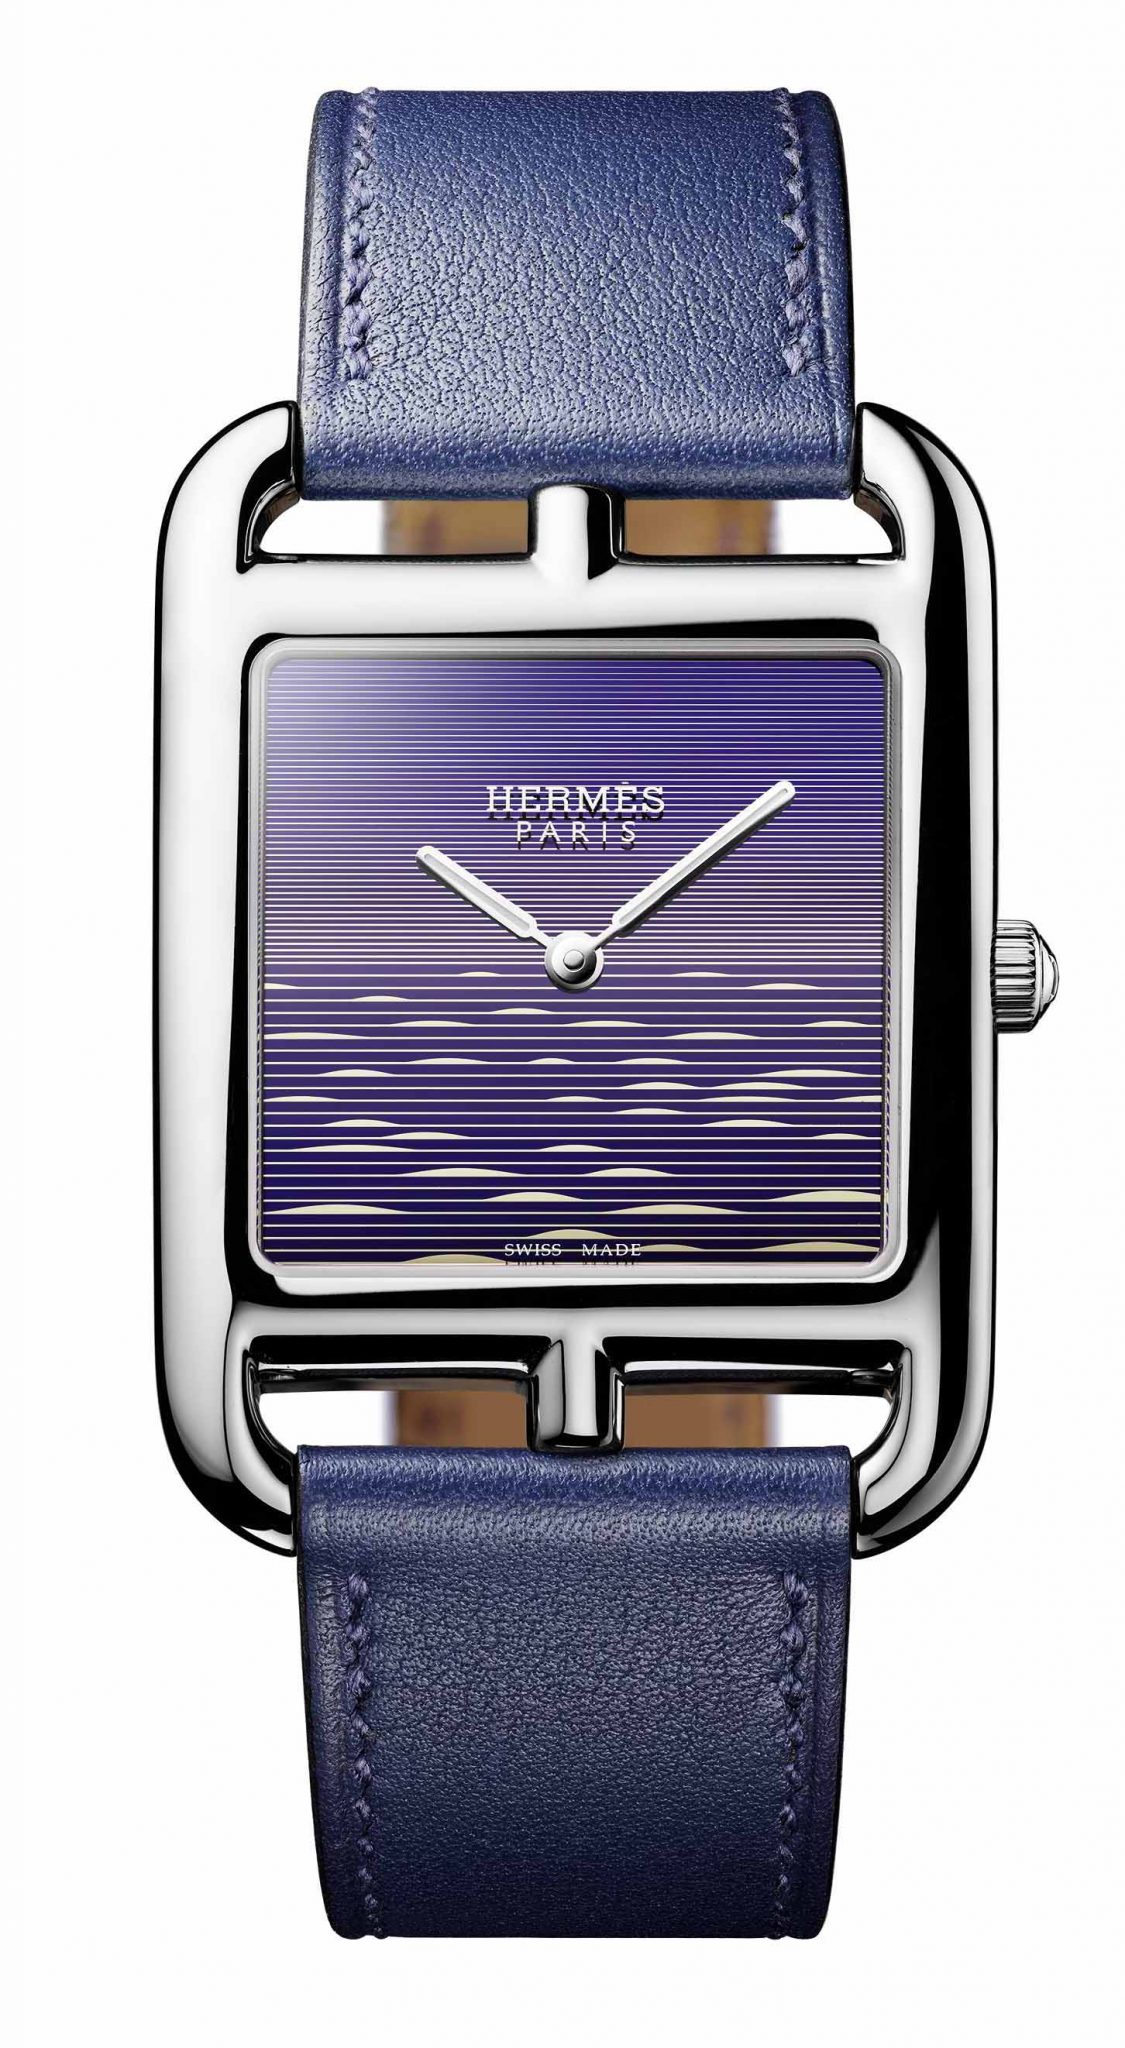 Hermes Cape Cod Watch $10,650 Contact if interested